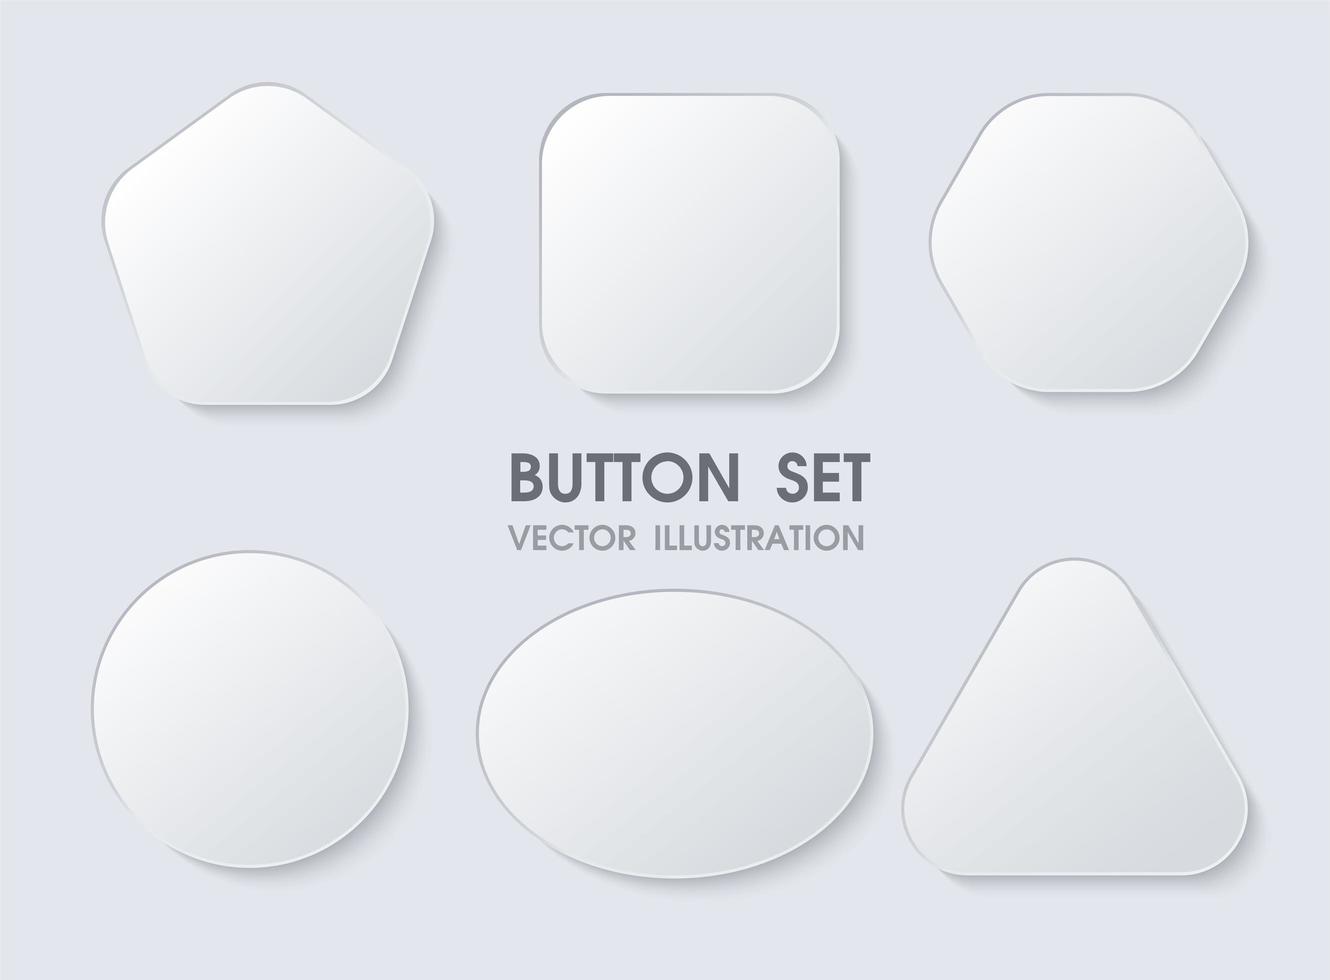 3D Geometric Buttons with Realistic Curves and Shadows vector